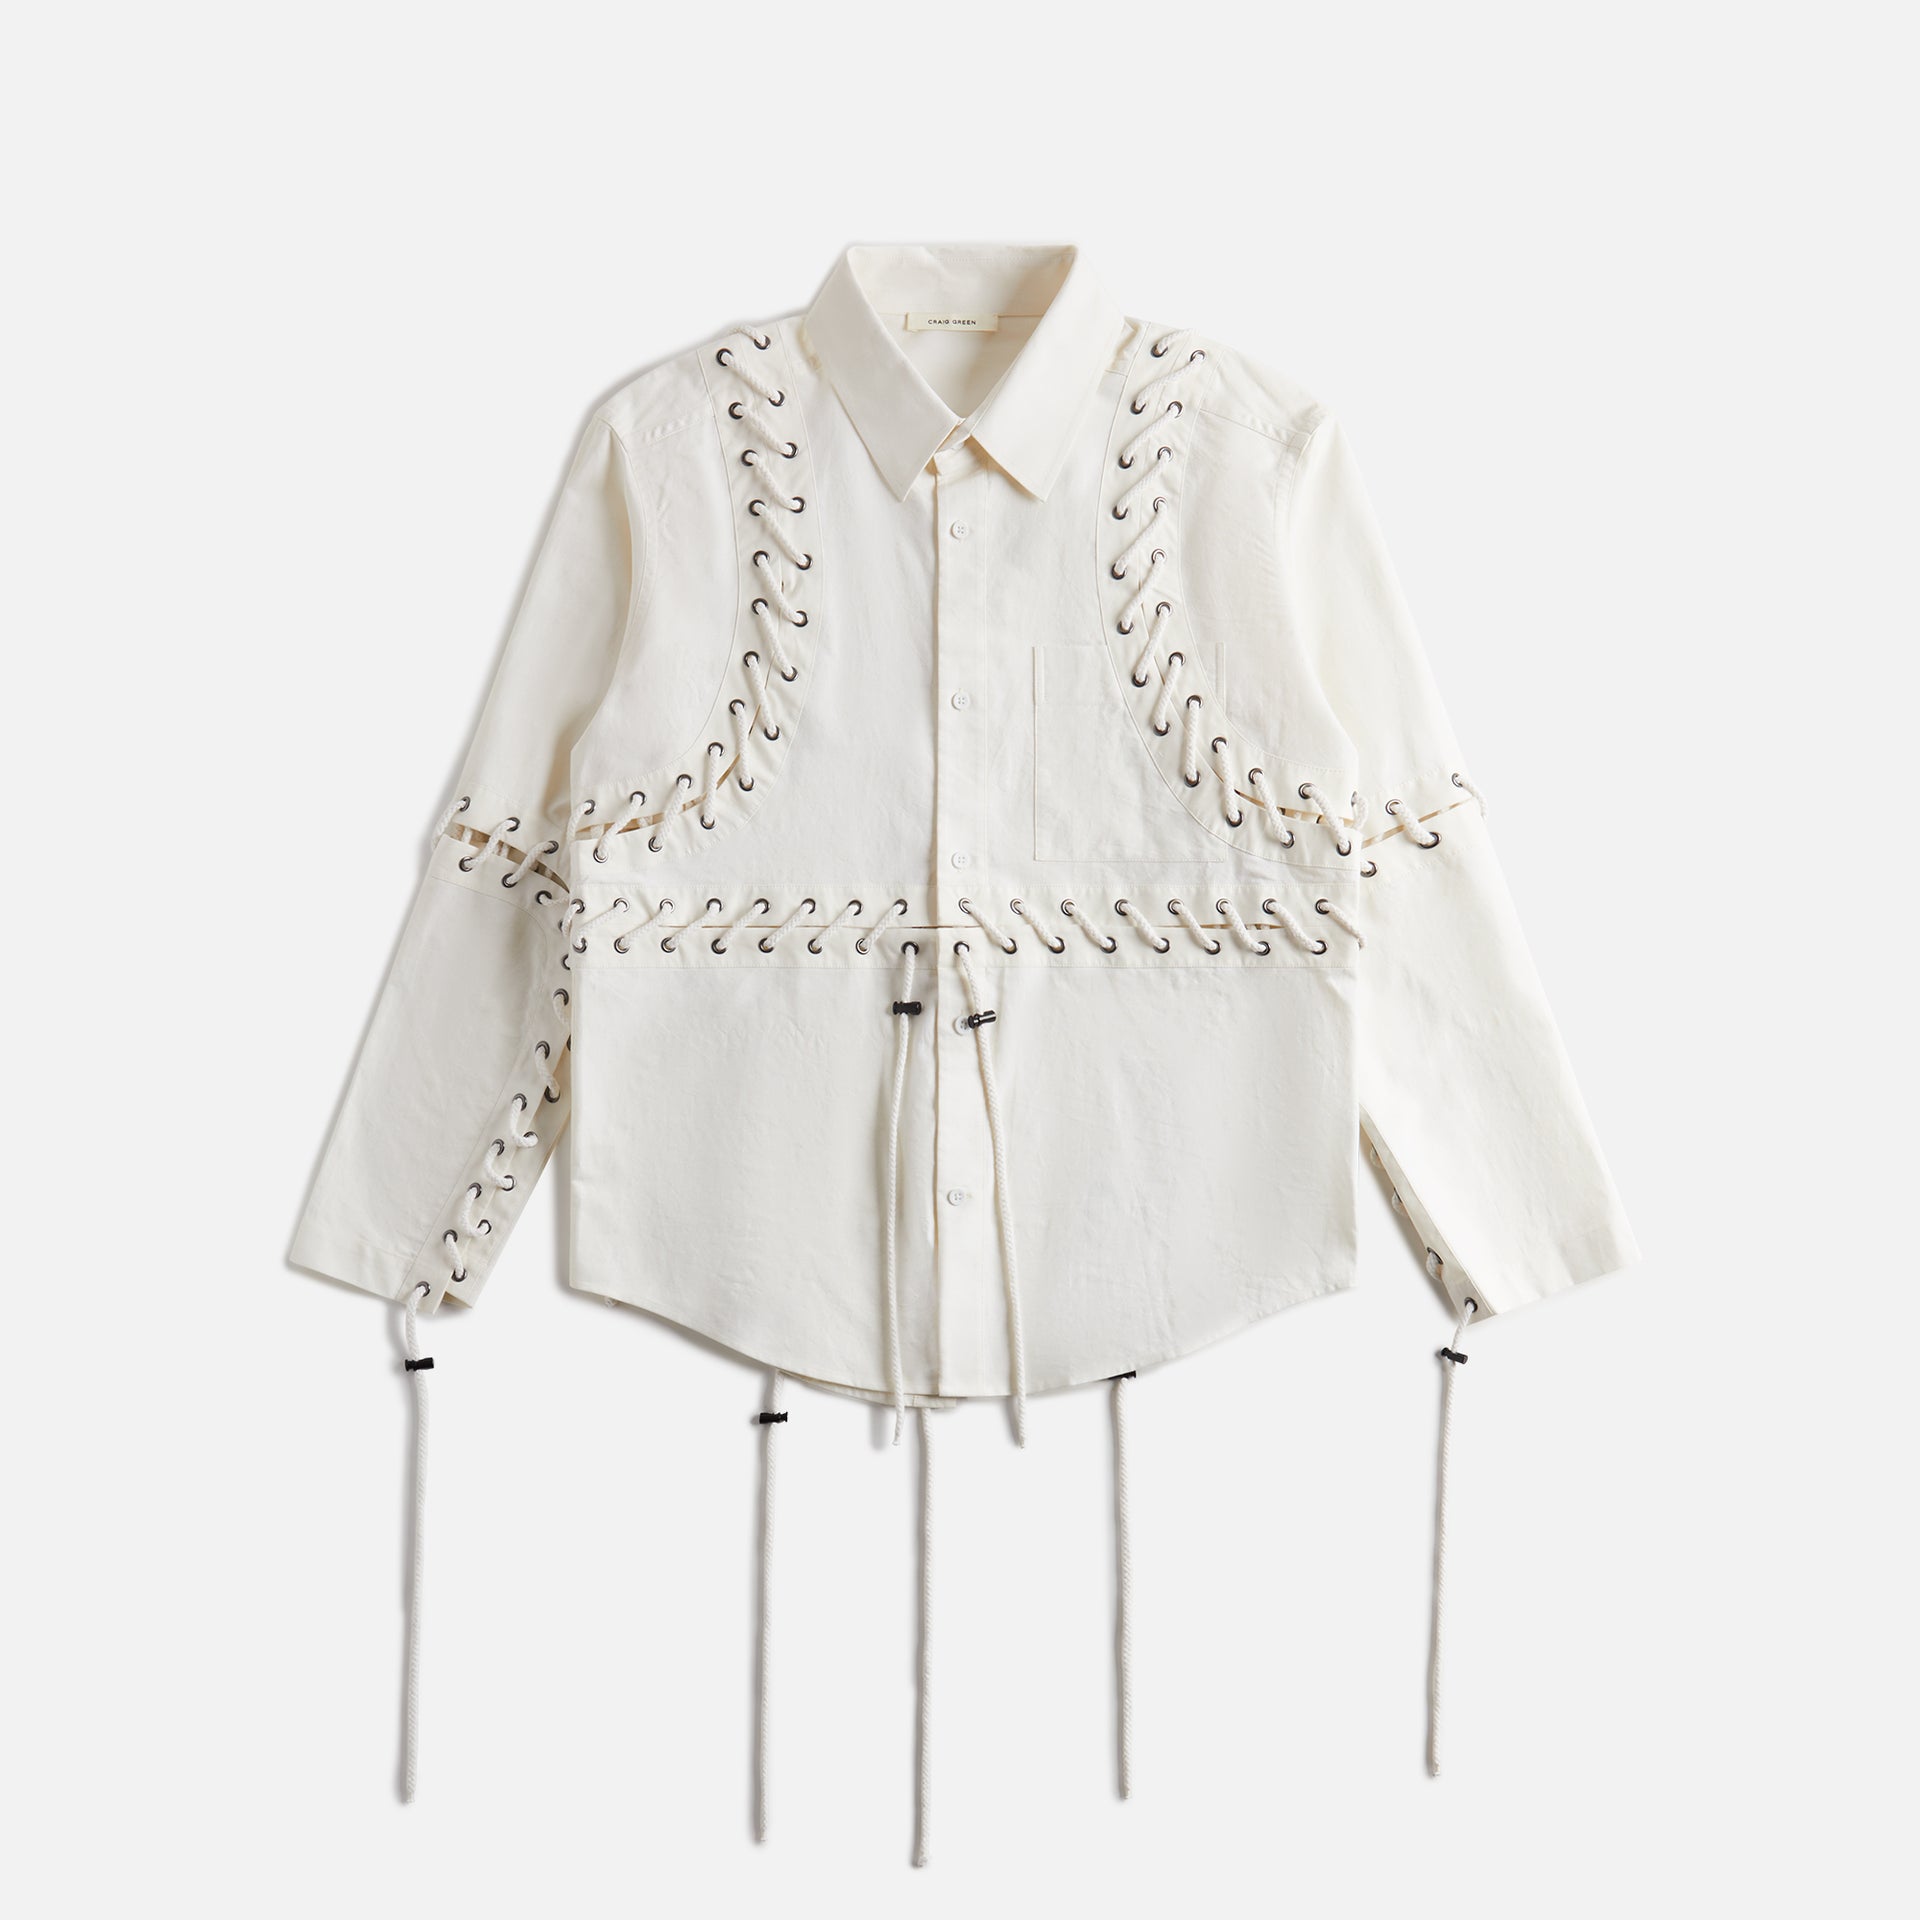 Craig Green Deconstructed Lace Shirt - White